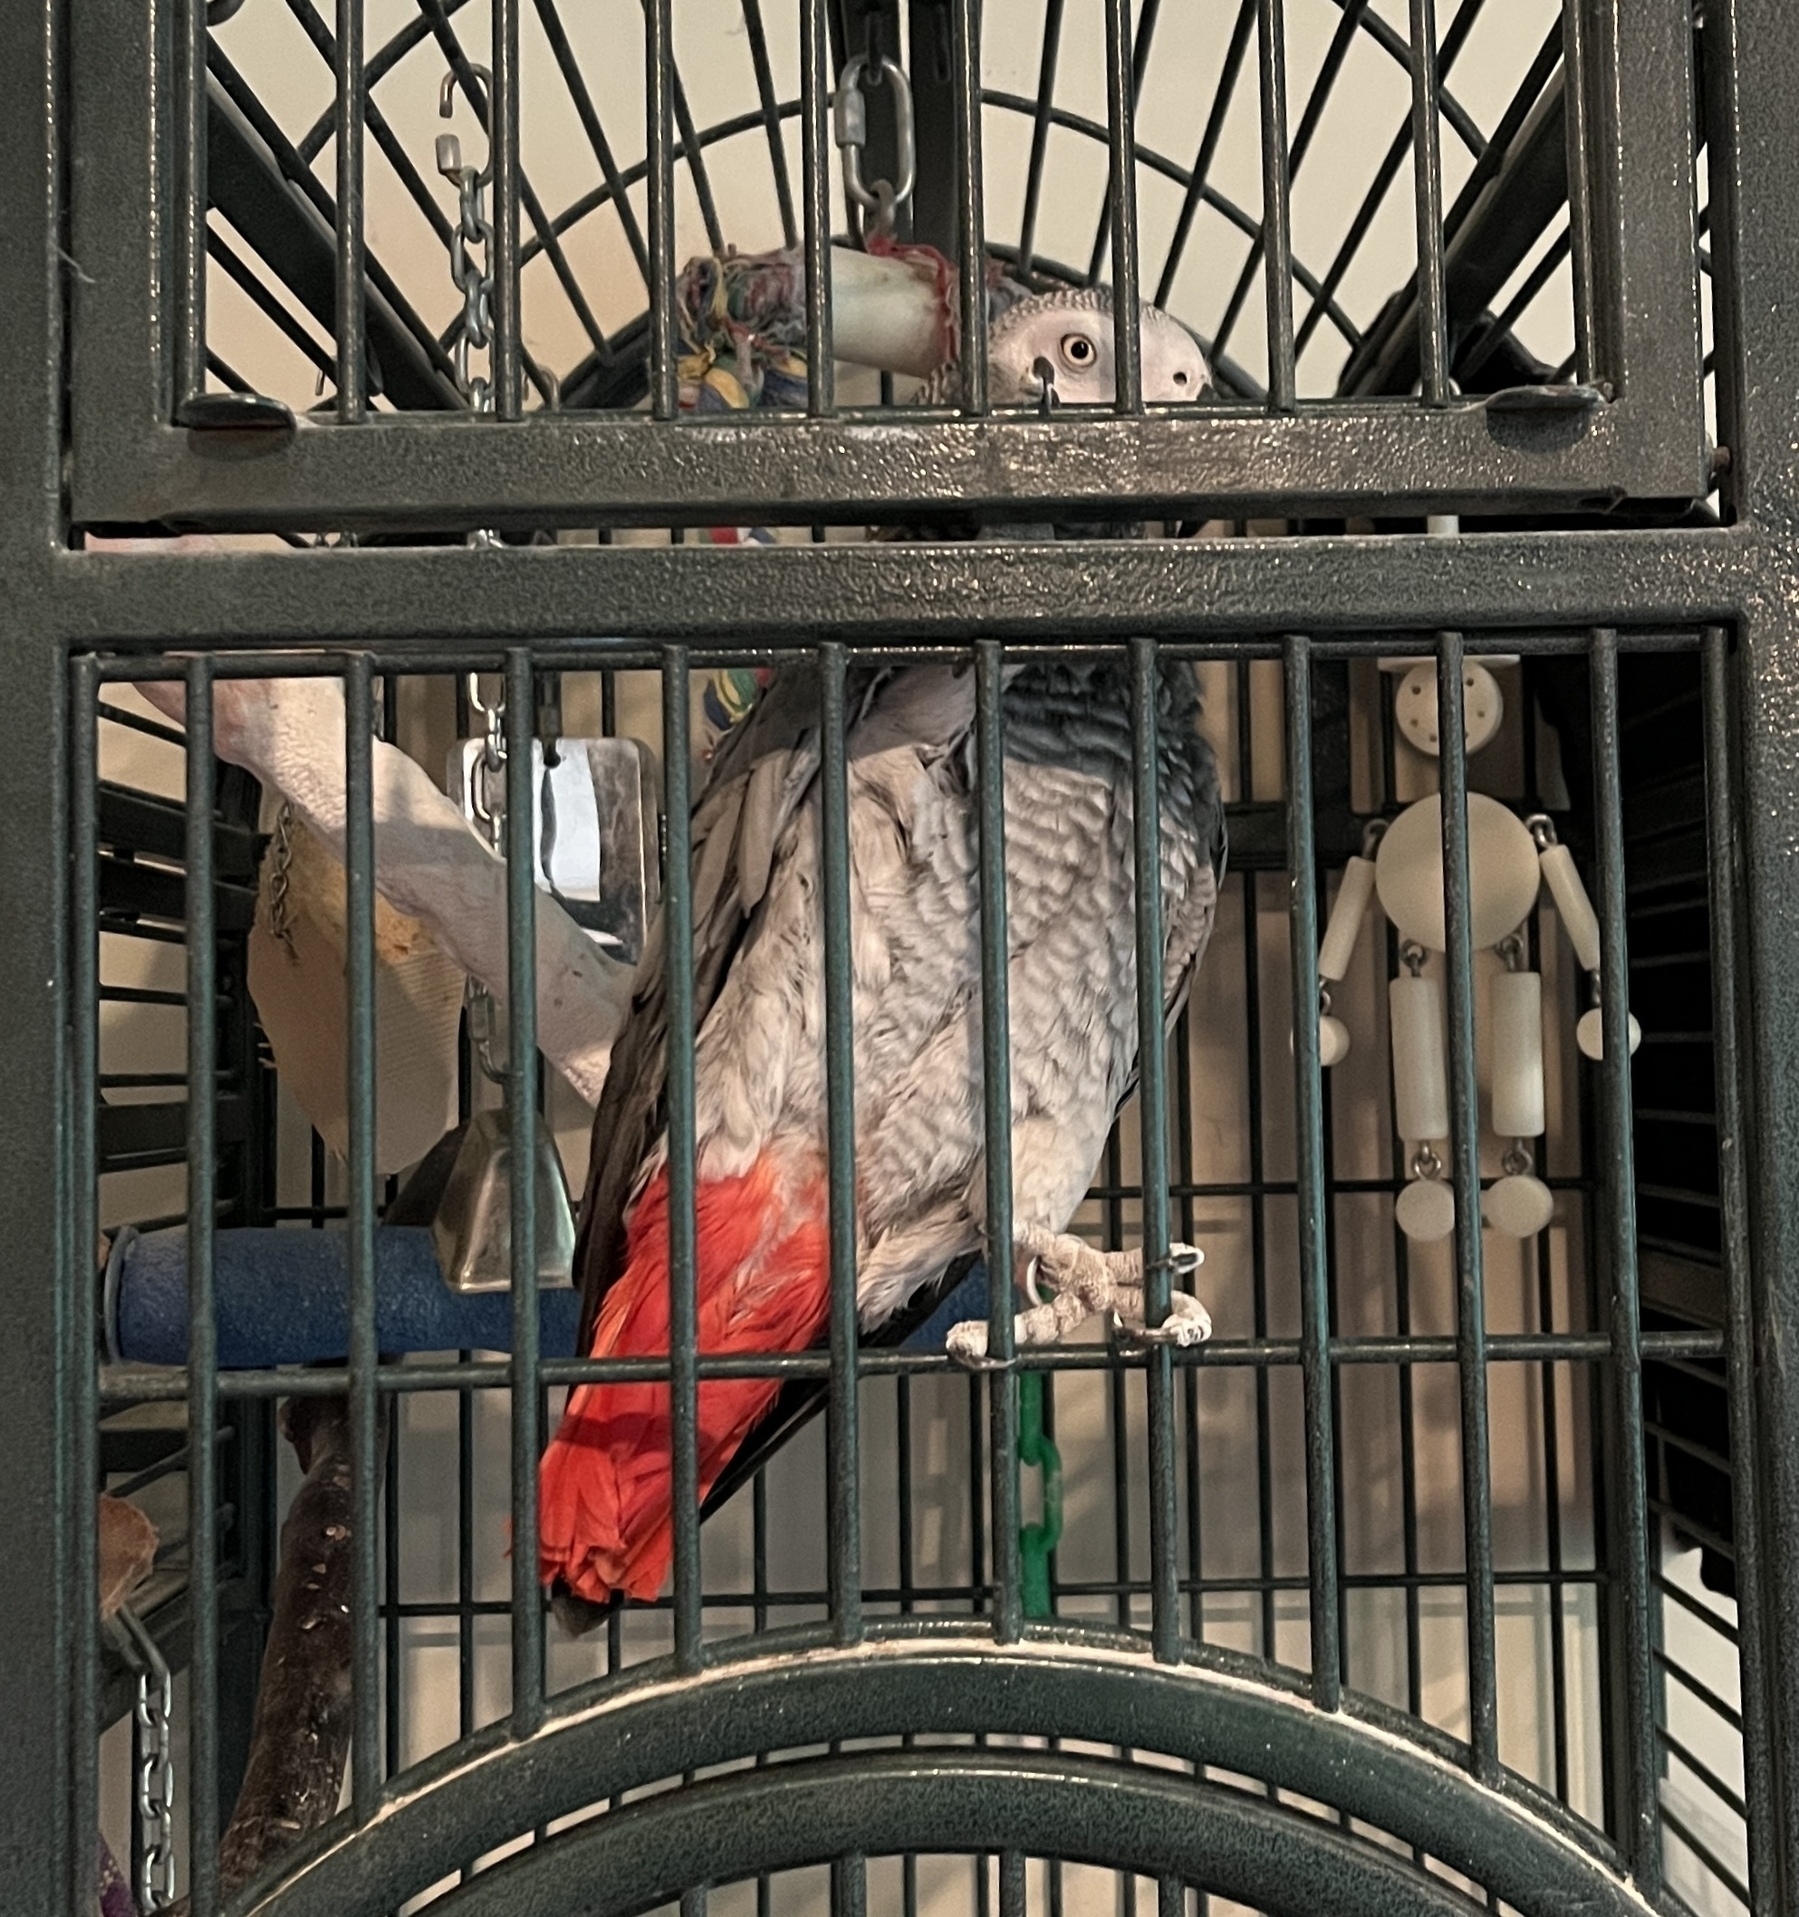 A big gray parrot picking at you through the bars of his cage. He has a red tail